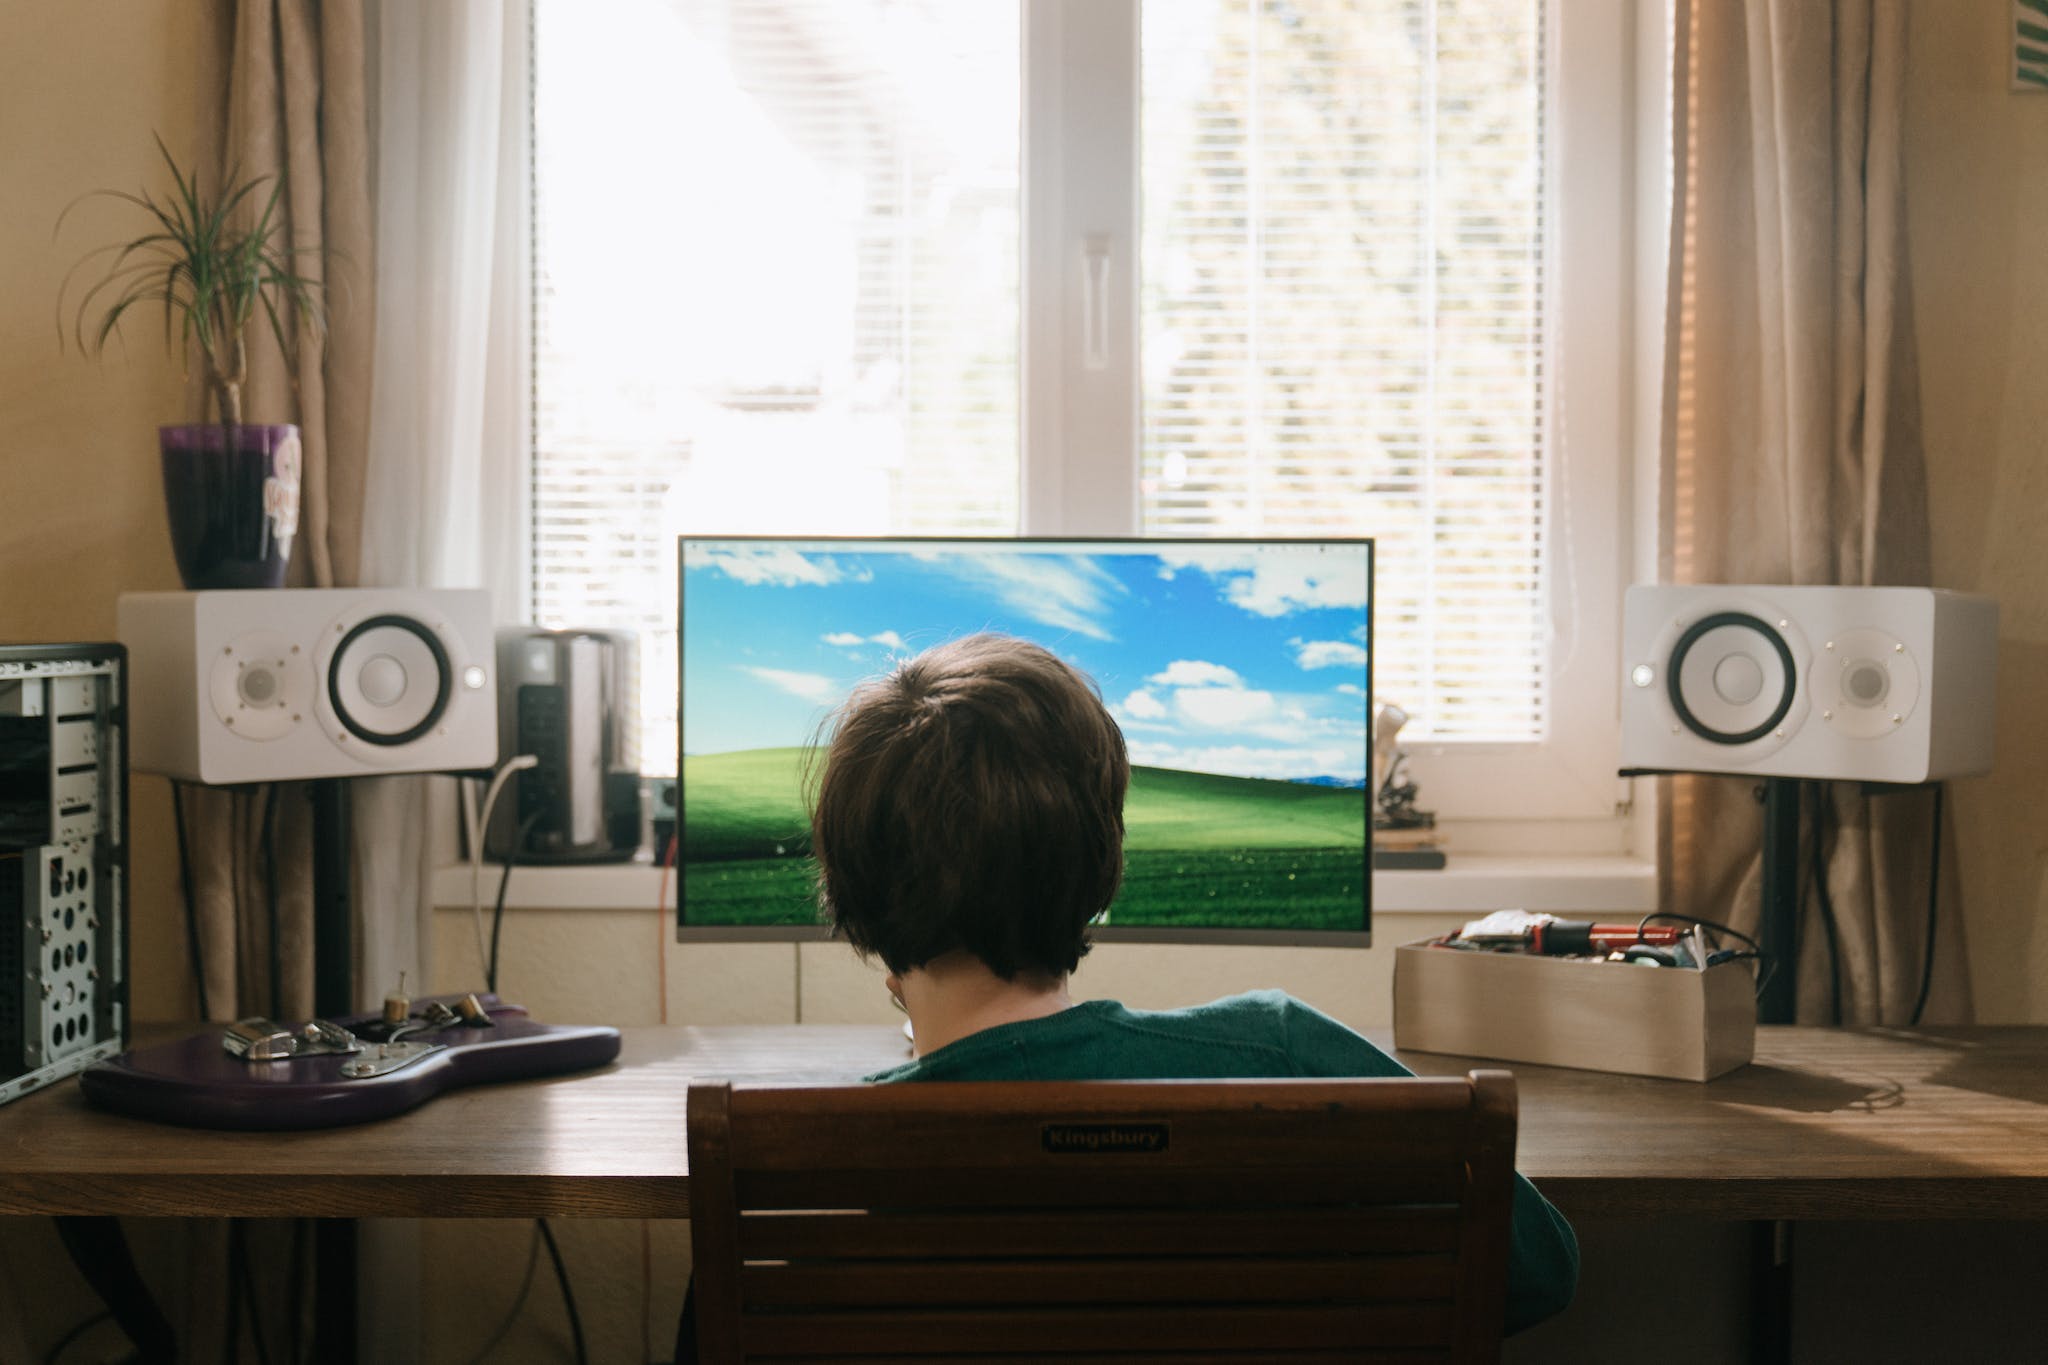 Boy in Red Shirt Sitting on Chair in Front of Black Flat Screen Tv